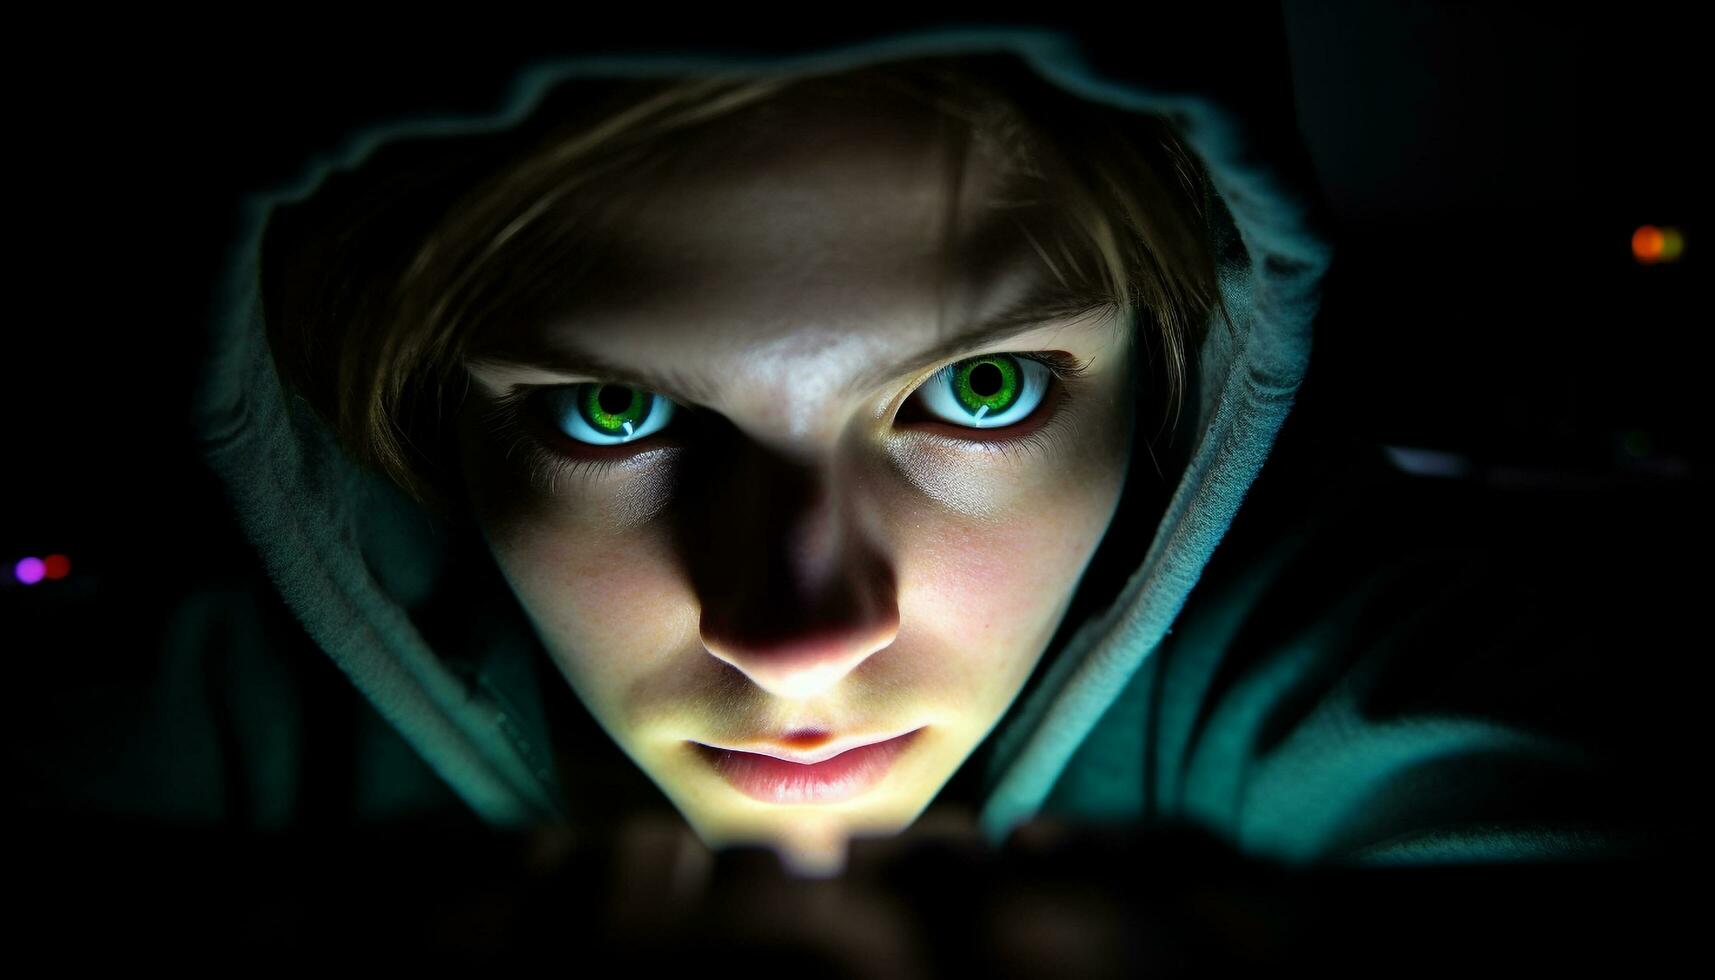 A spooky portrait of a young adult staring into darkness generated by AI photo